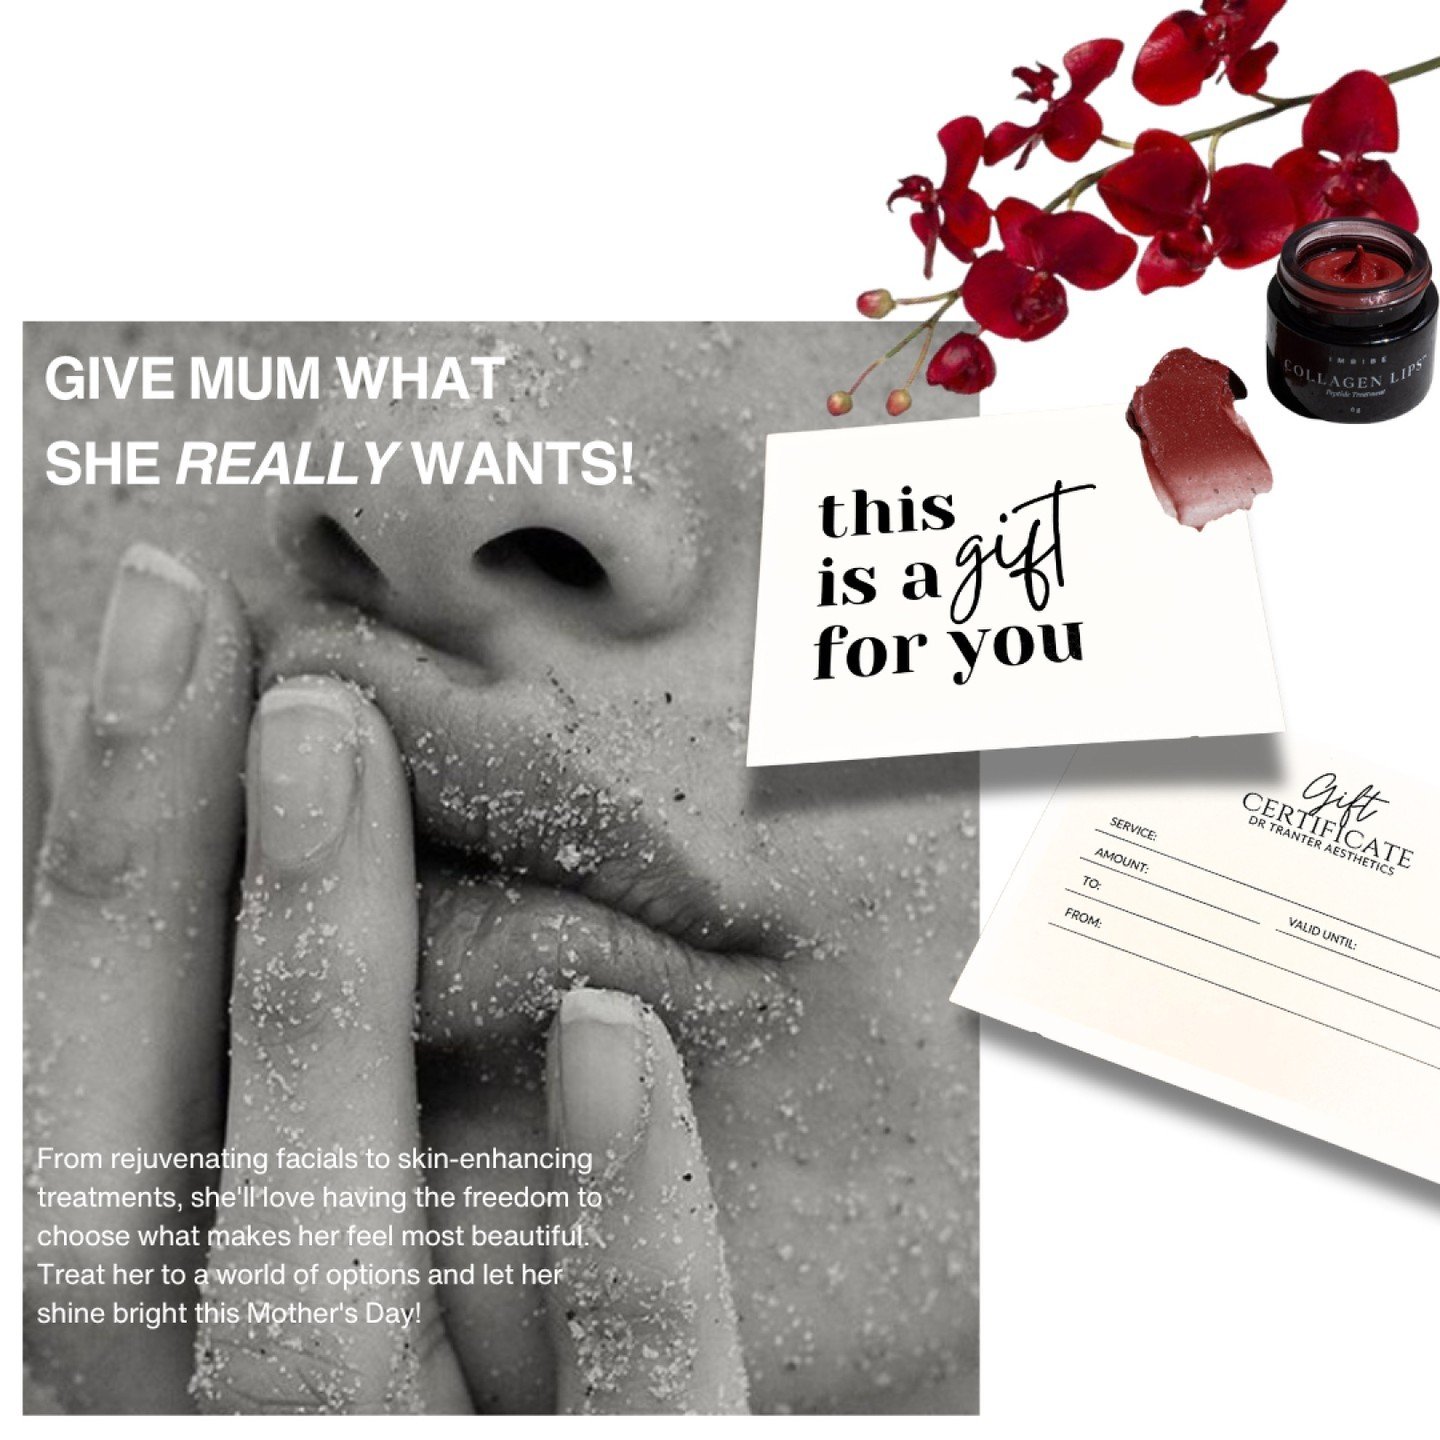 Still searching for the perfect Mother's Day gift? Give Mum the gift of choice with our customisable gift vouchers! Let her indulge in her favorite treatments, because she deserves nothing but the best. It's the ultimate way to show your love and app